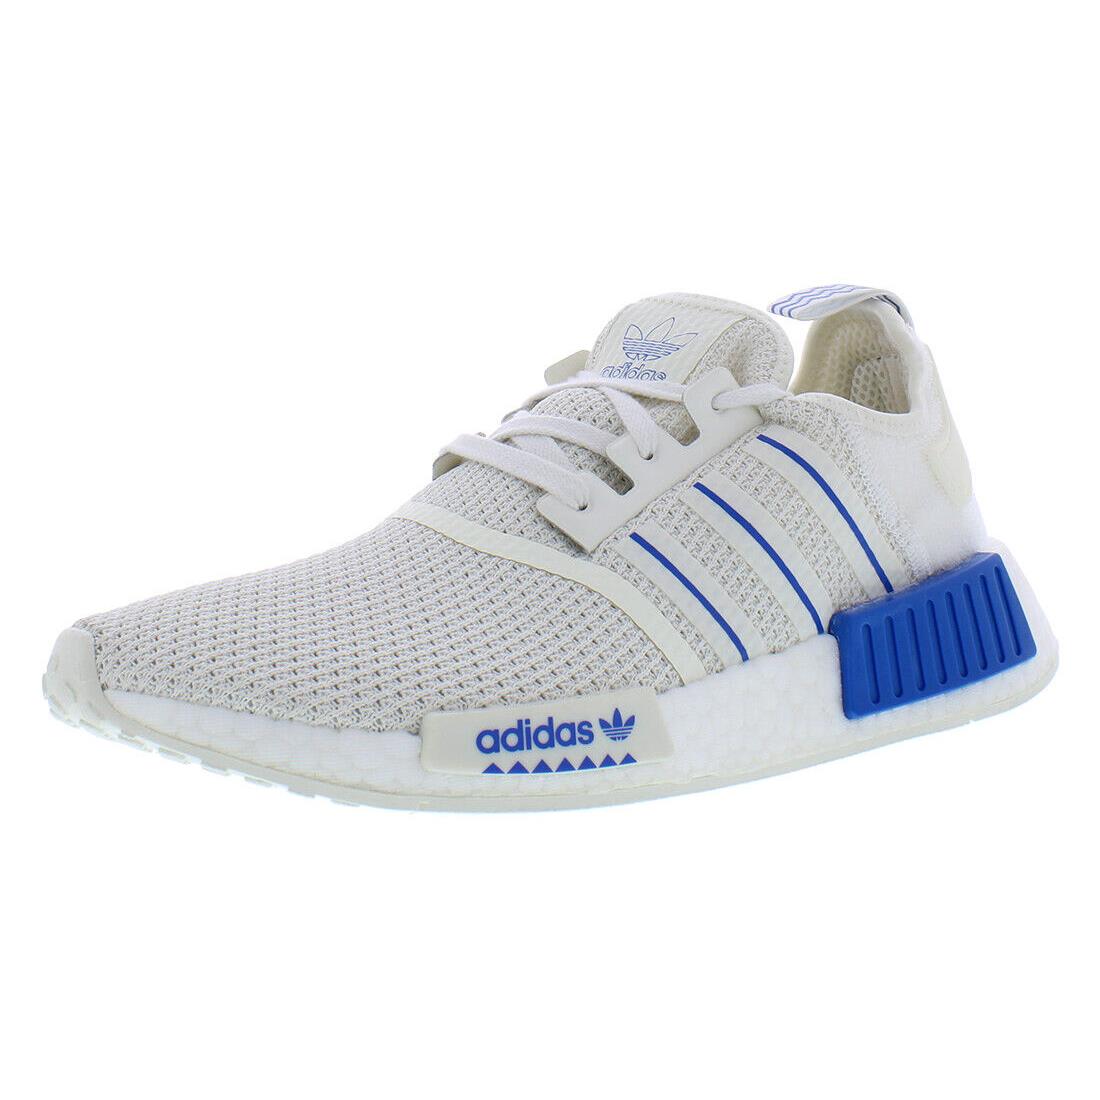 Adidas NMD_R1 Mens Shoes Size 7.5 Color: White/blue - White/Blue, Main: White